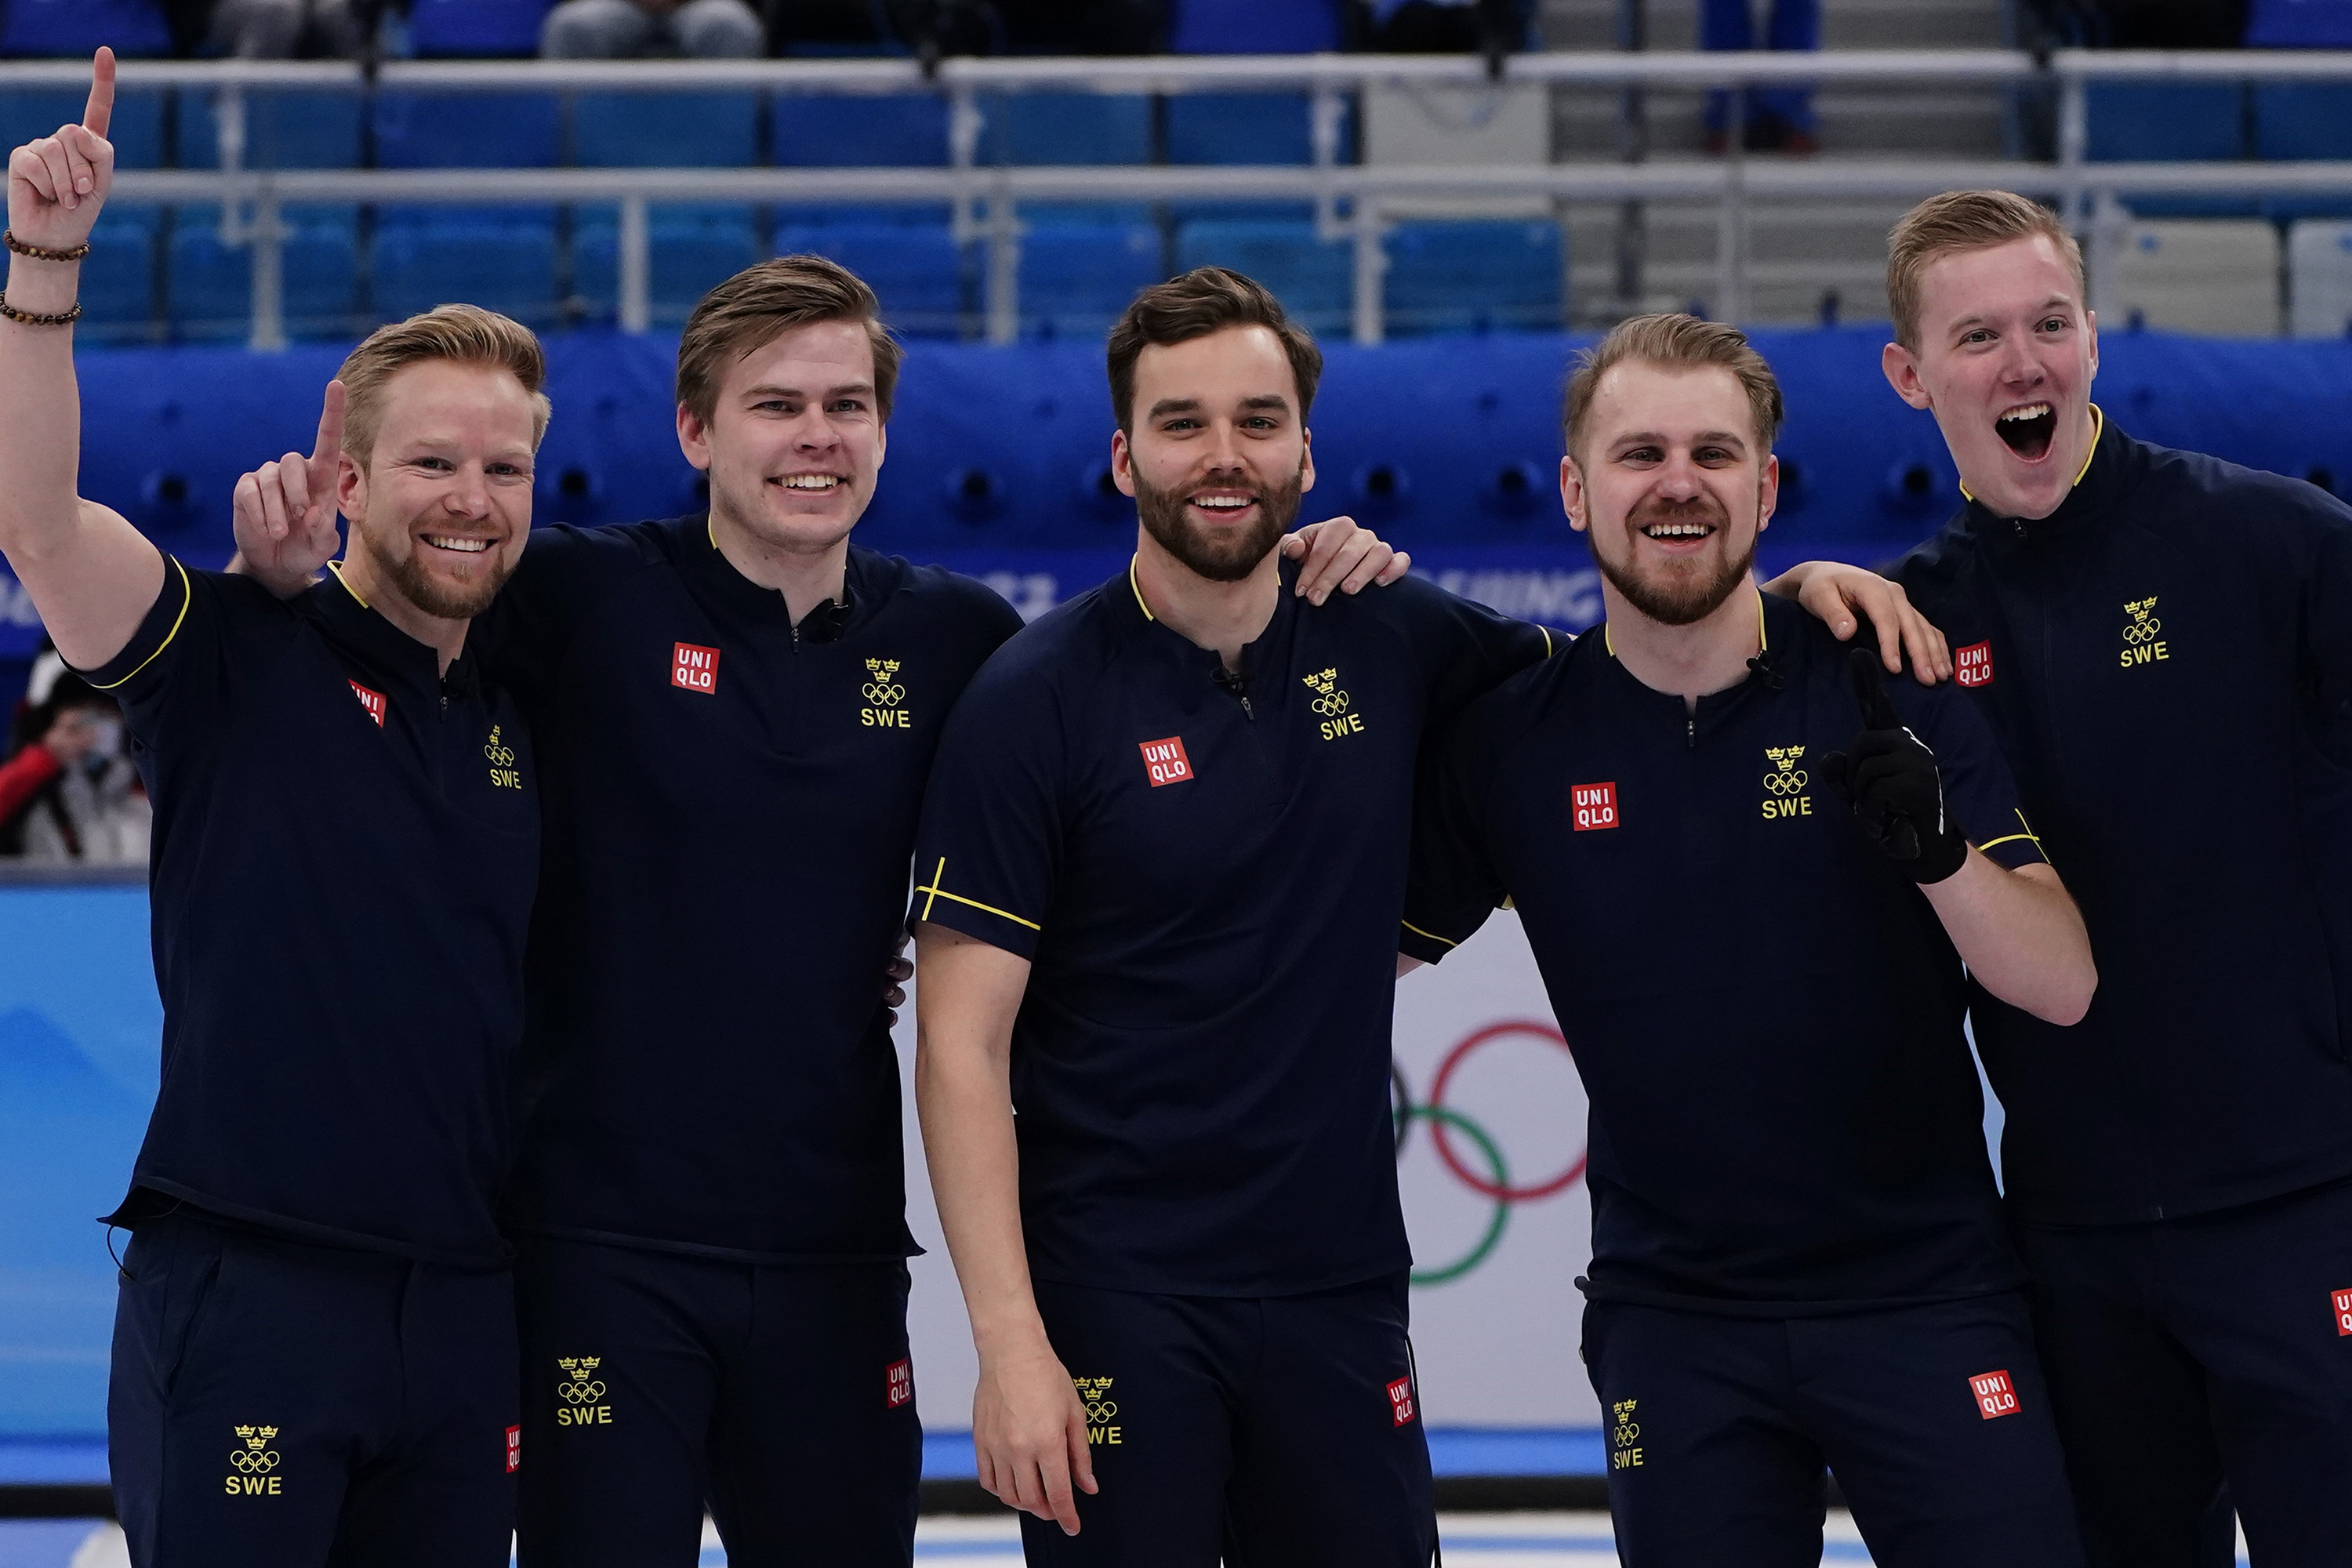 Team Sweden celebrates their win in the men's curling final match between Britain and Sweden on Saturday.